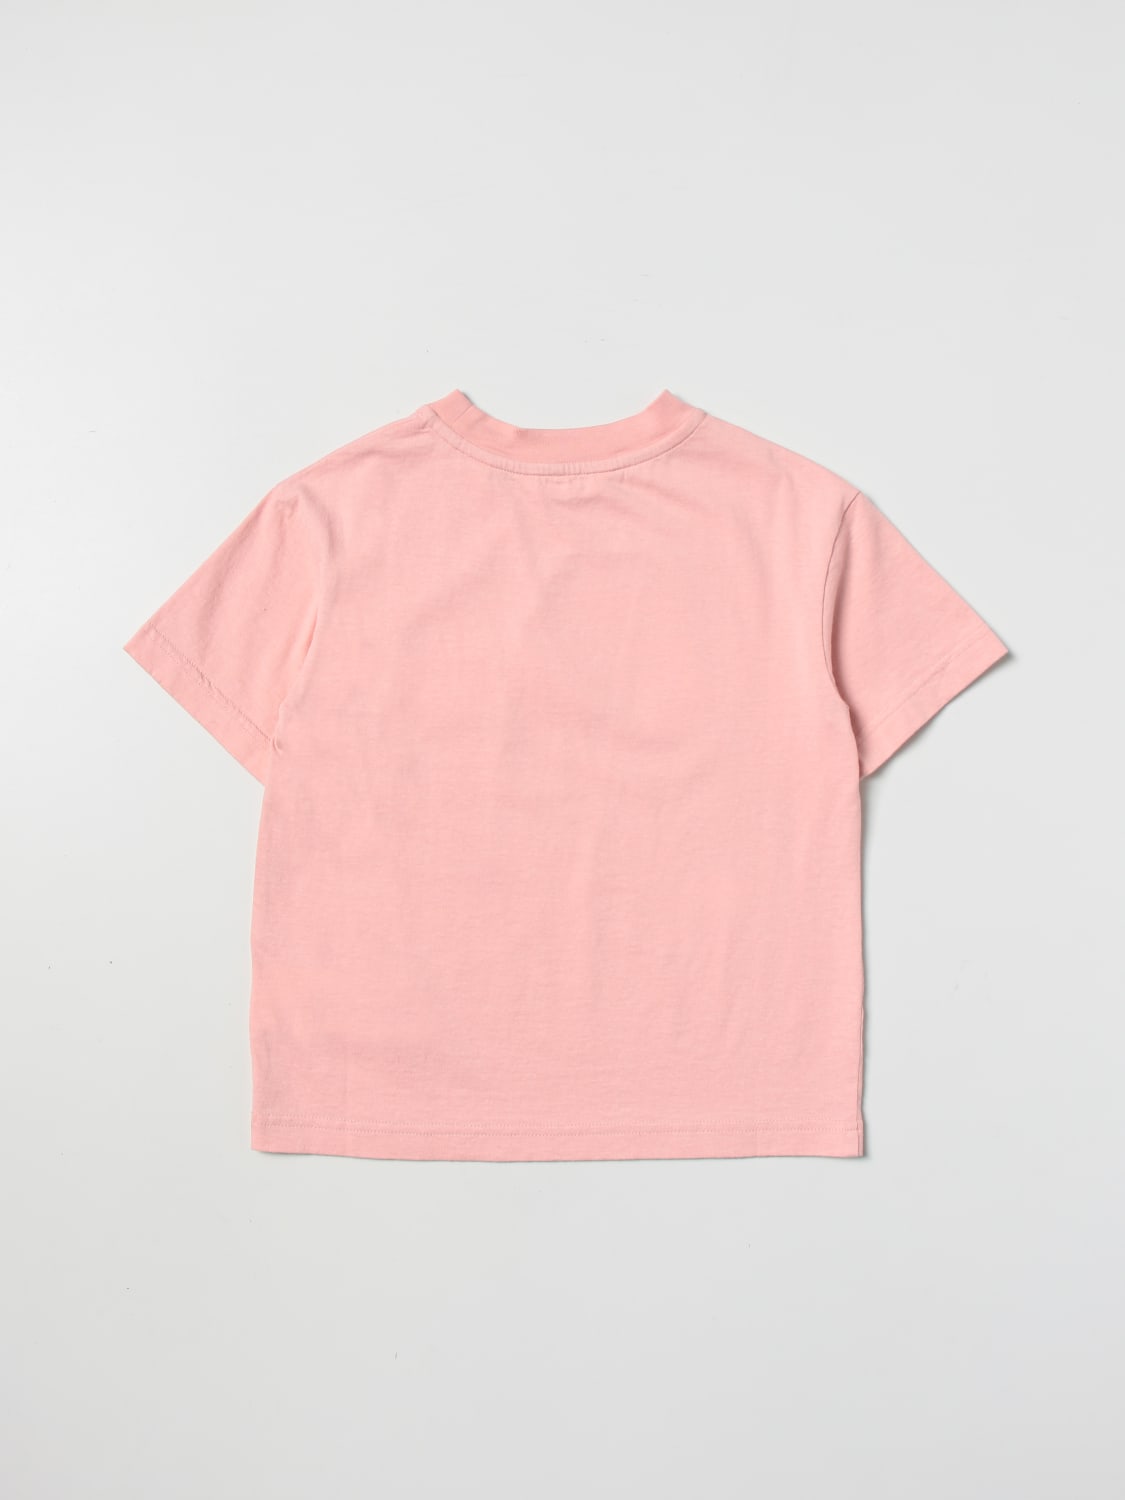 Palm Angels t-shirt for girls